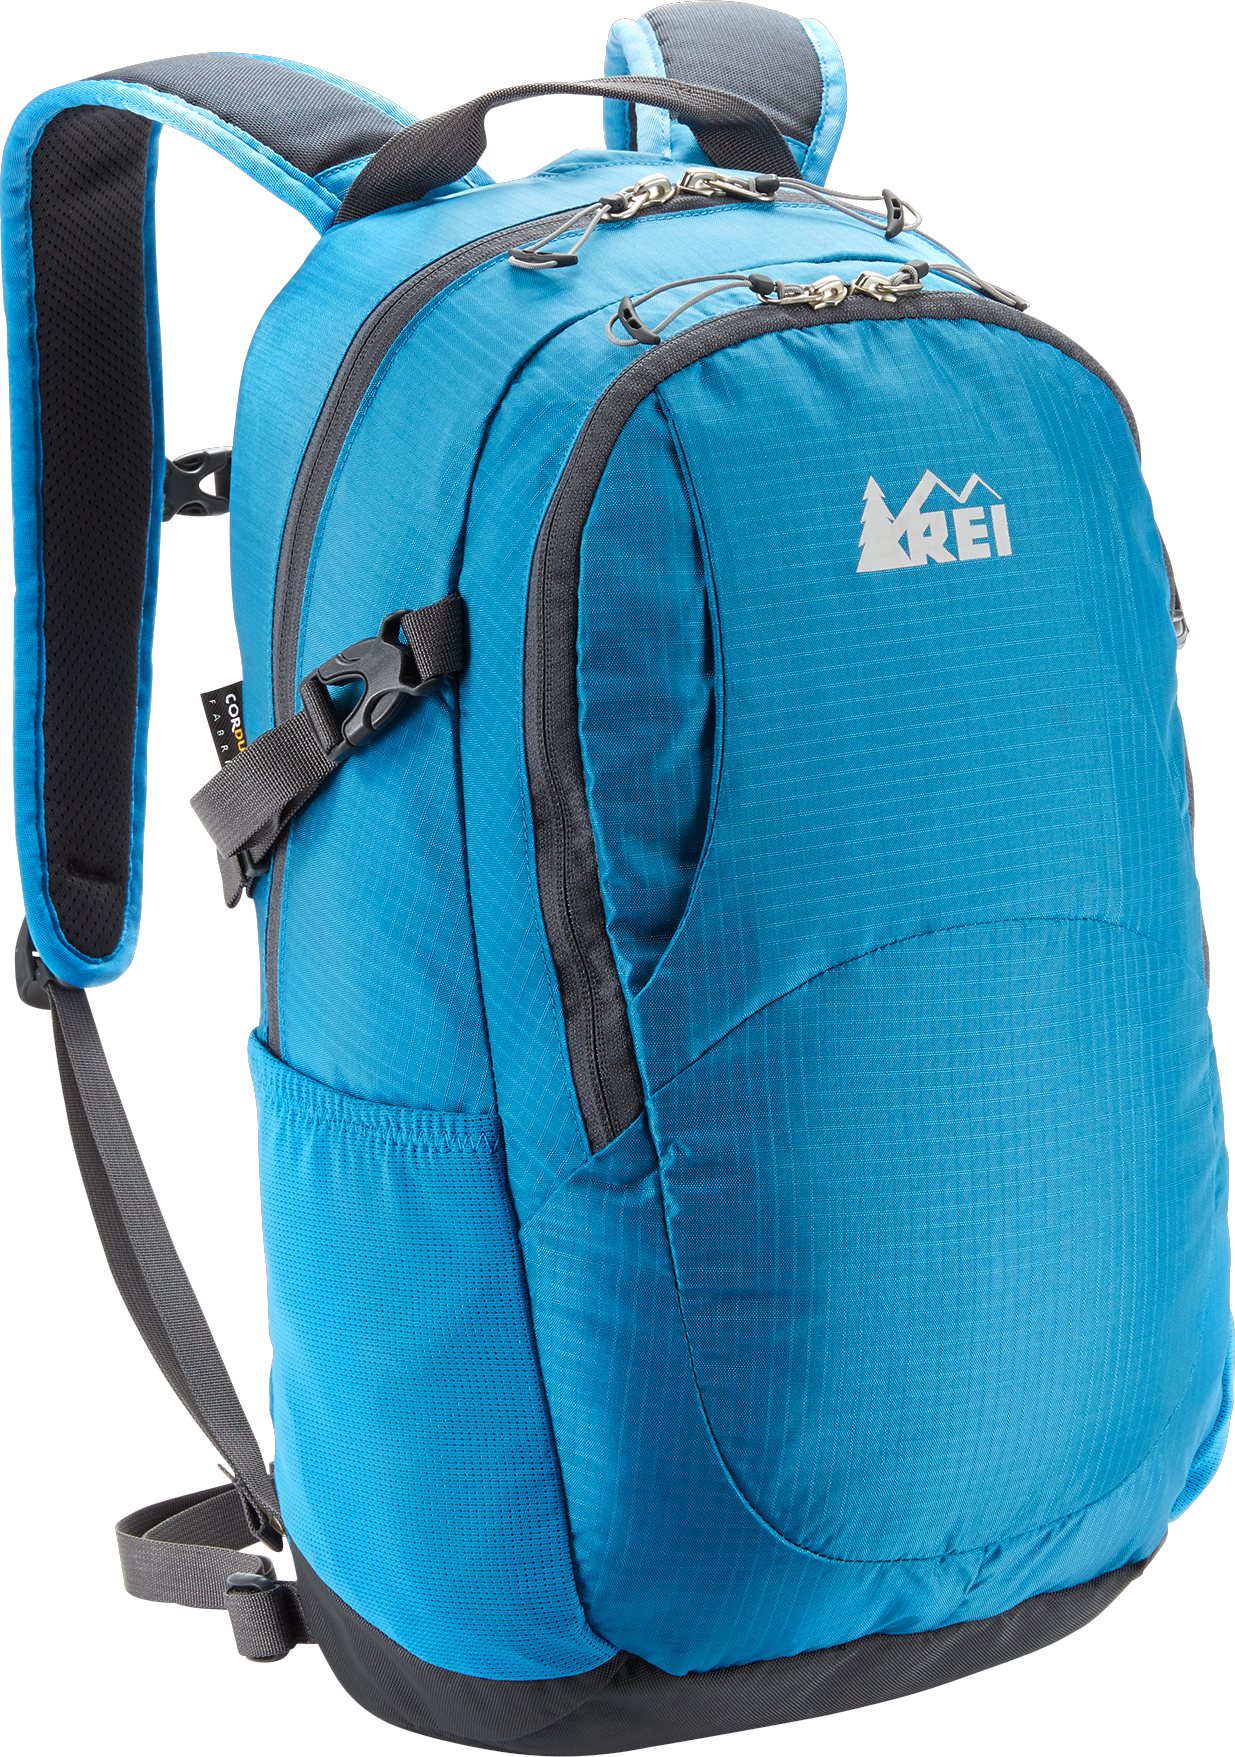 Today only: REI Co-op Ghost Cruiser travel pack for $40